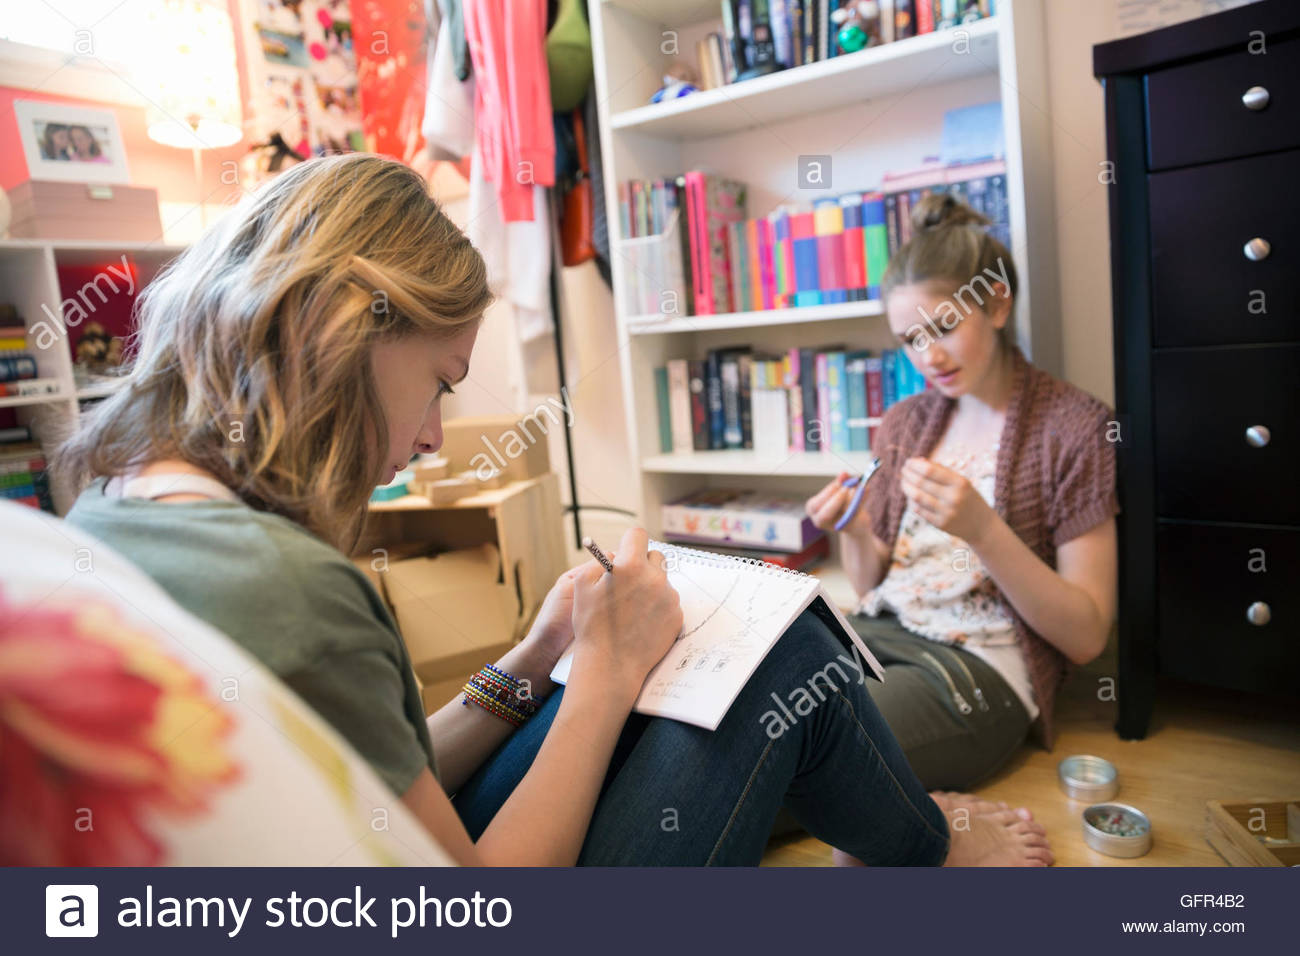 Girls designing and making jewelry in bedroom Stock Photo